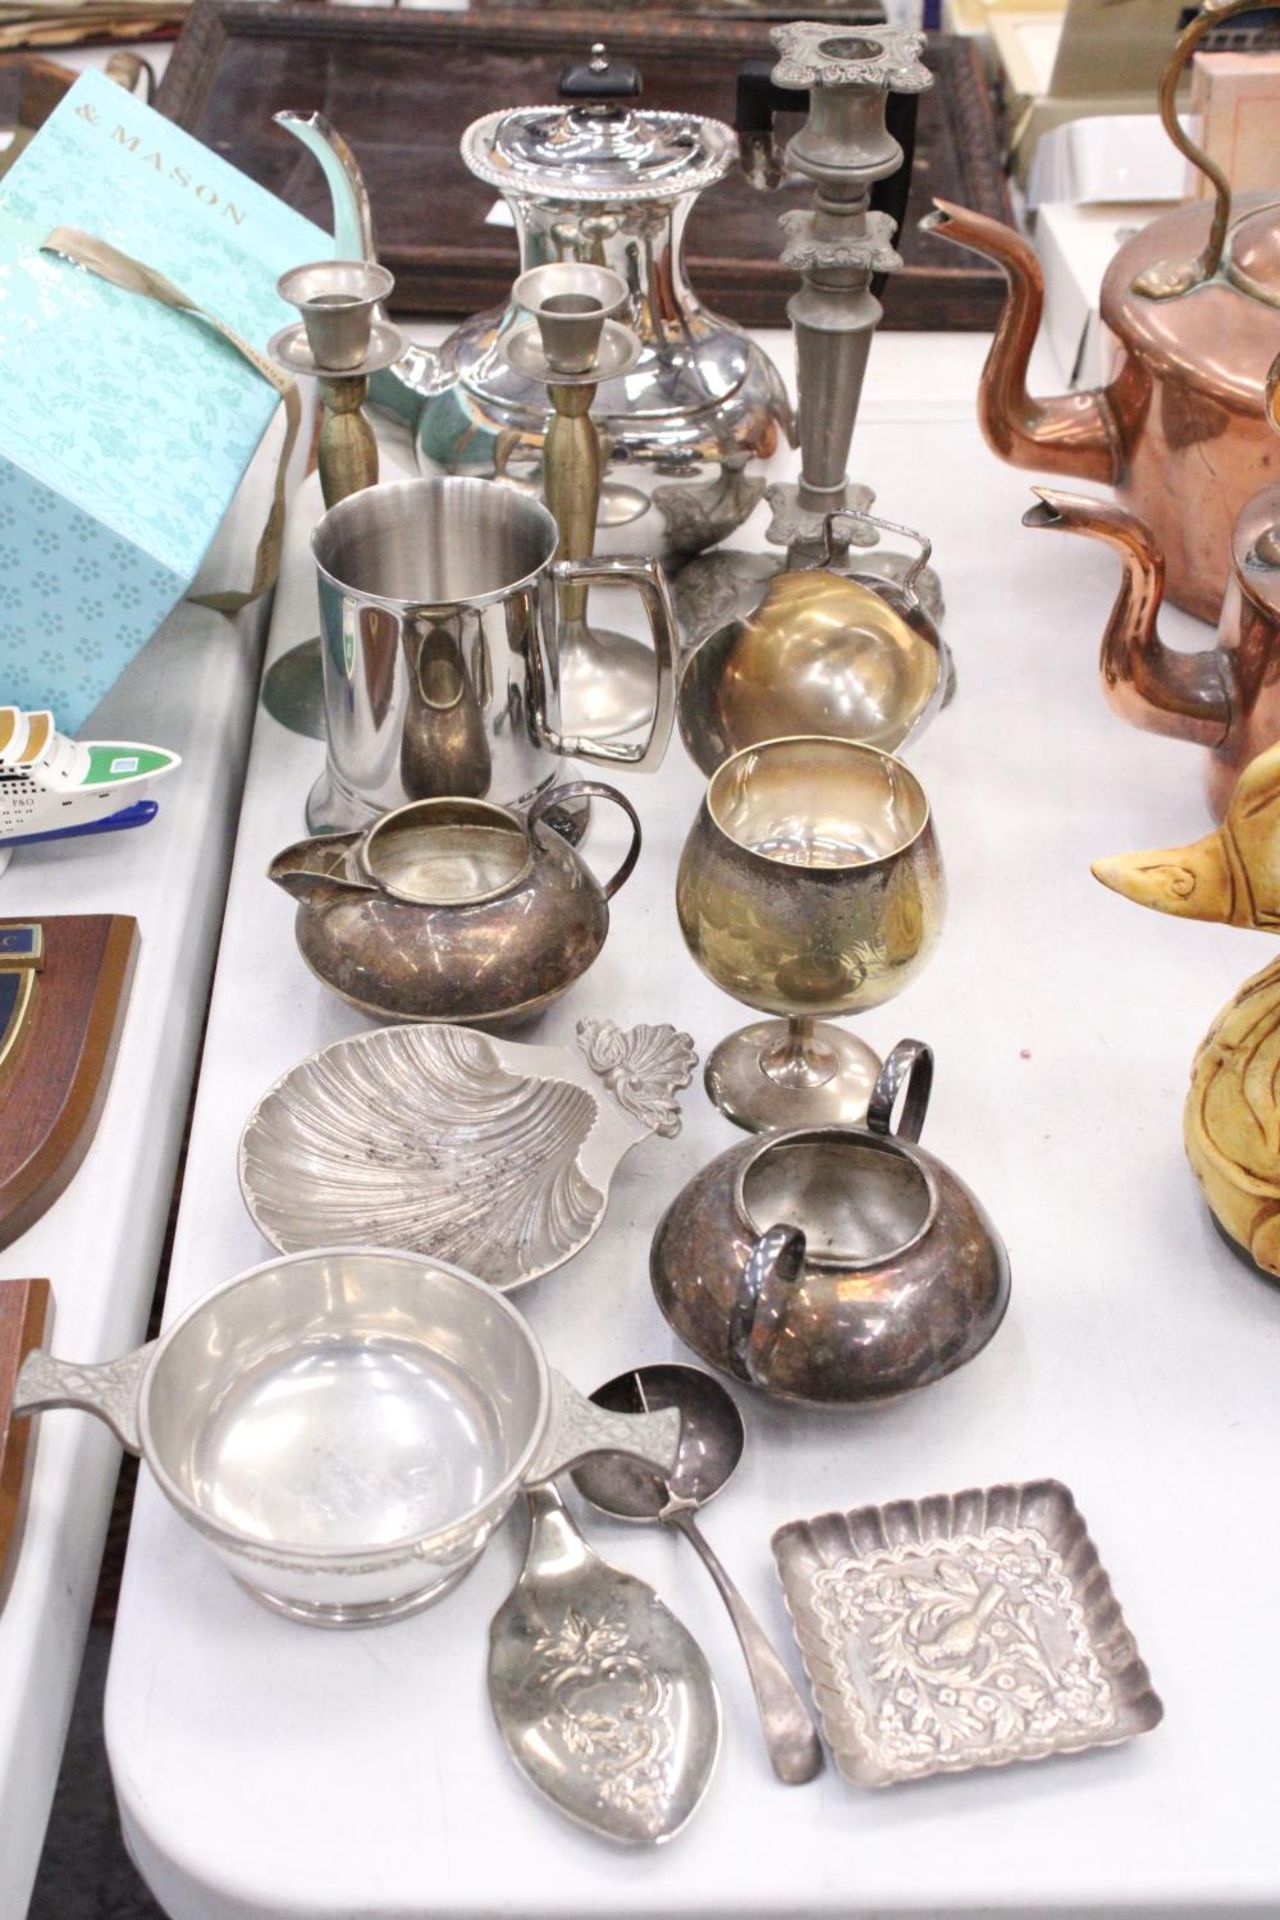 A LARGE QUANTITY OF SILVER PLATED ITEMS TO INCLUDE CANDLESTICKS, A KETTLE, A TANKARD, JUGS, BOWLS,